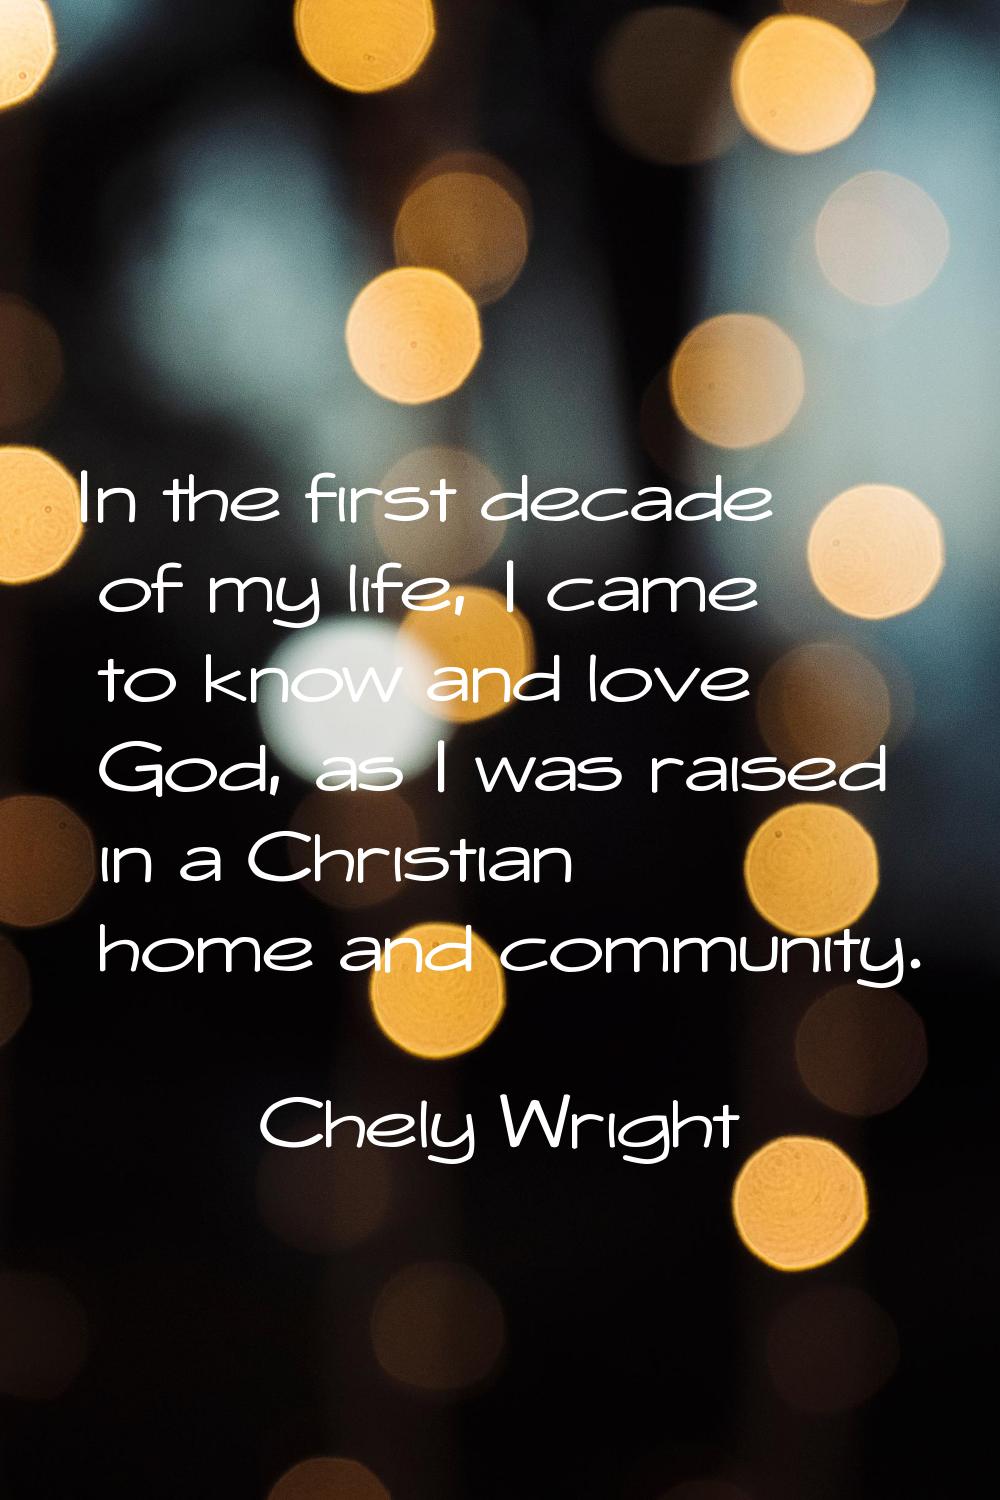 In the first decade of my life, I came to know and love God, as I was raised in a Christian home an